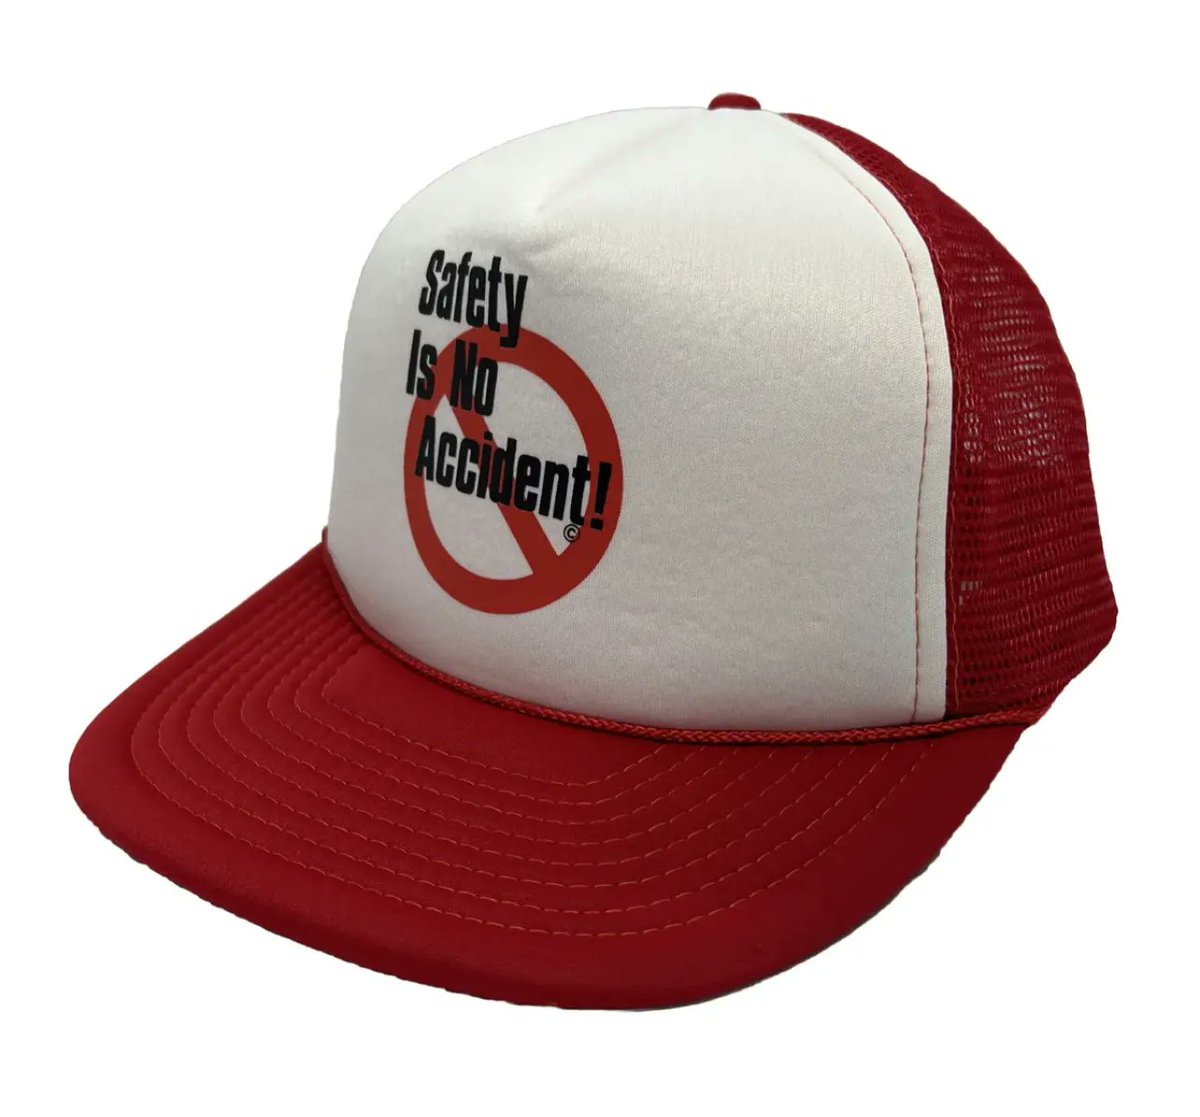 Just dropped a classic on #eBay! 🔥 Vintage 'Safety is No Accident' Hat - snap back, red mesh trucker style. Perfect for collectors or anyone who loves a throwback vibe. One size, men's fit. Don't miss out! 🧢 #VintageTruckerHat #SafetyFirst #RetroStyle buff.ly/461gkWD